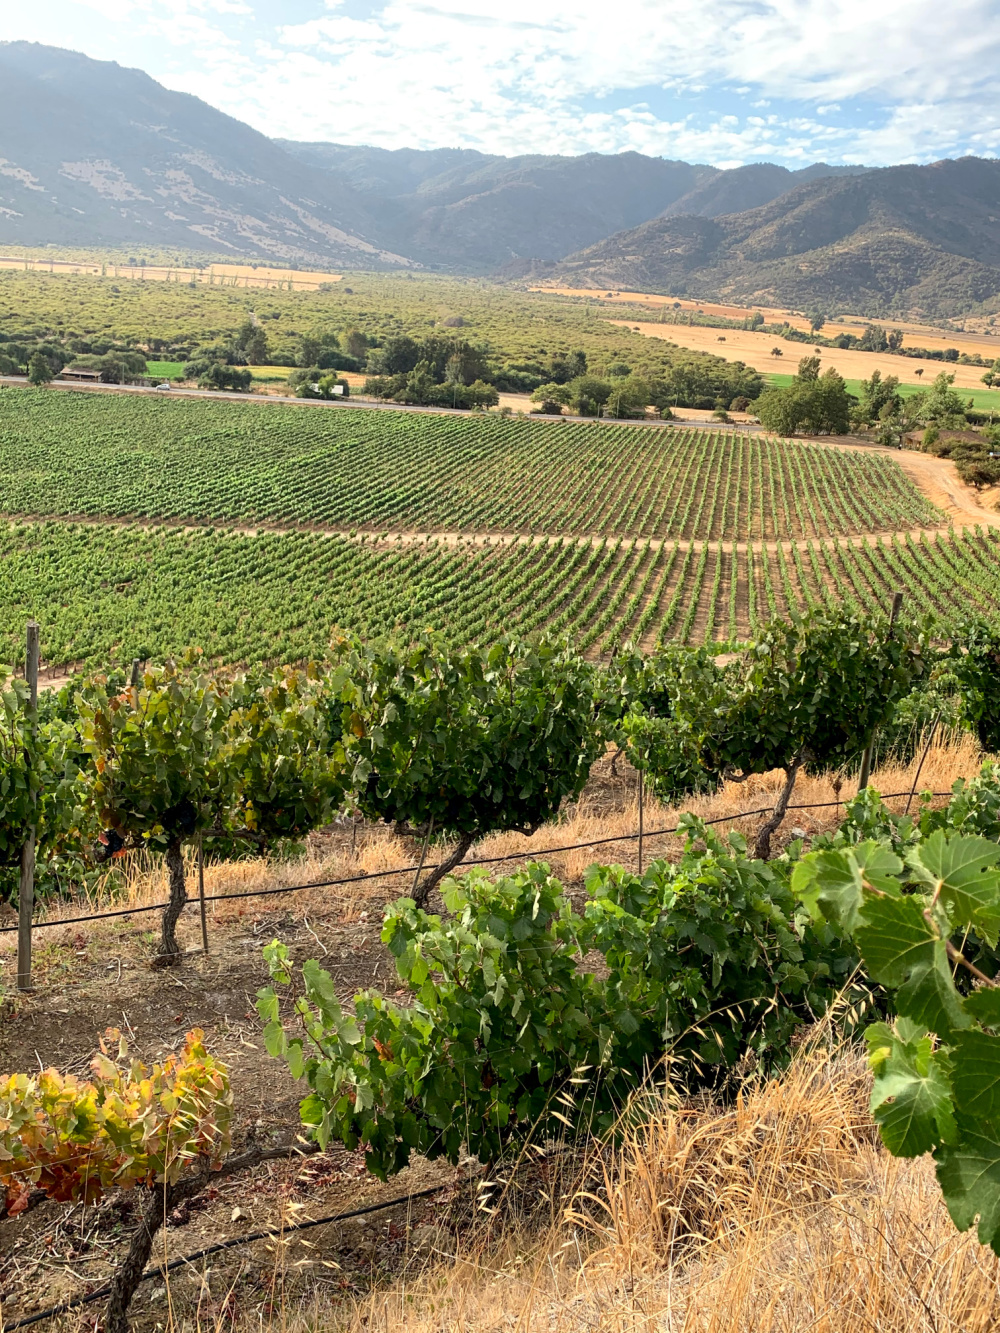 Maule Valley in Chile home of the TerraNoble Wines